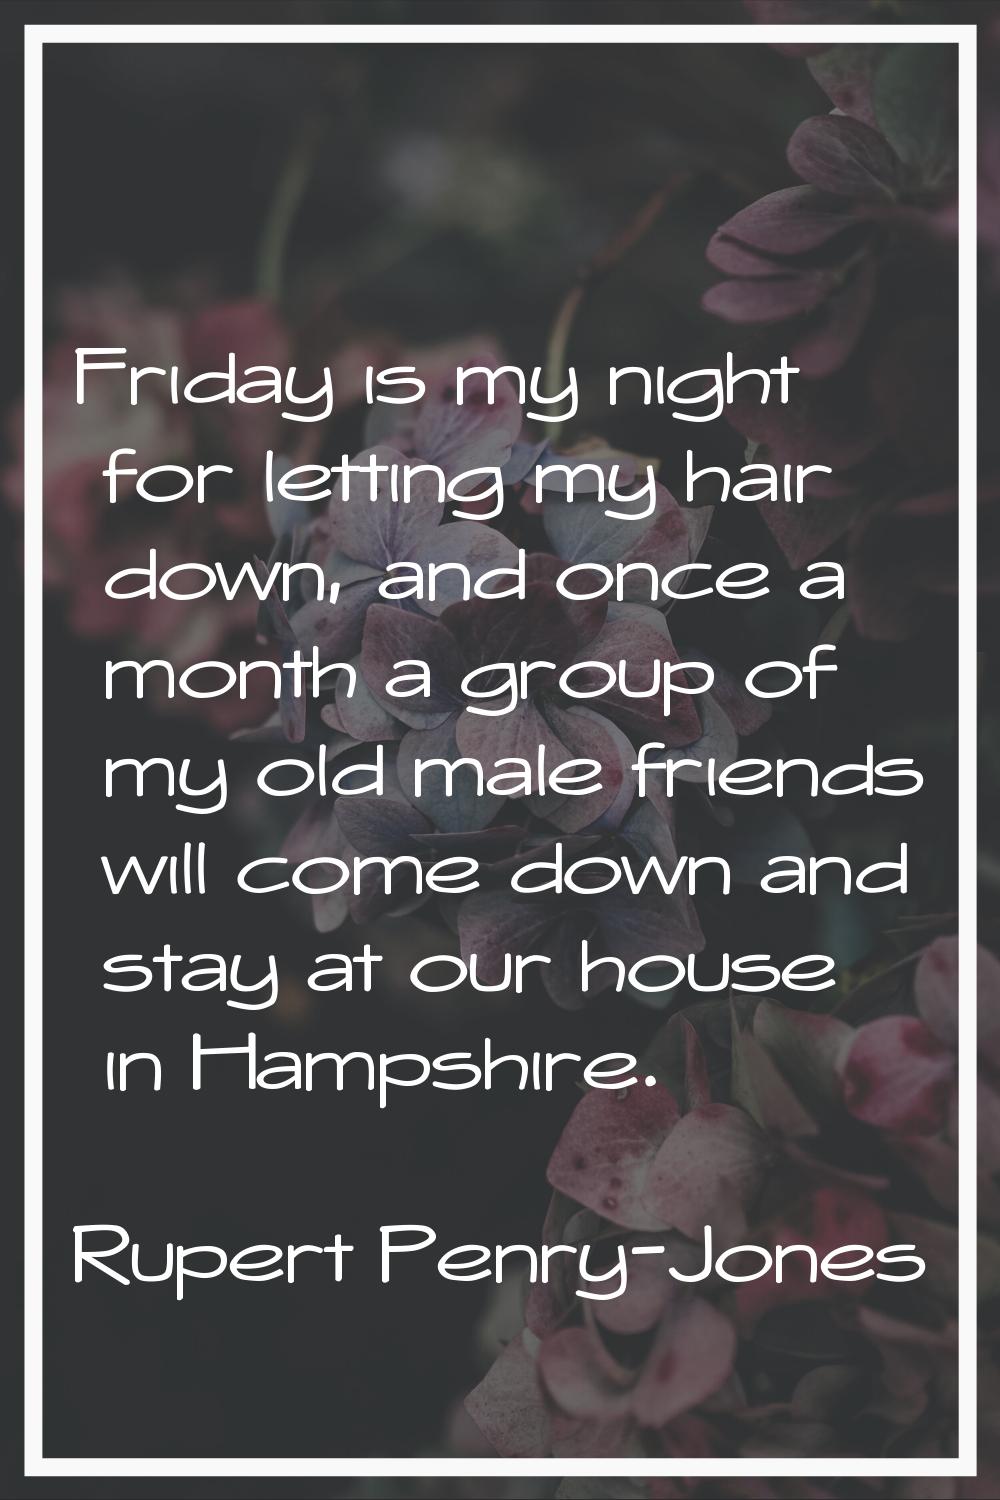 Friday is my night for letting my hair down, and once a month a group of my old male friends will c